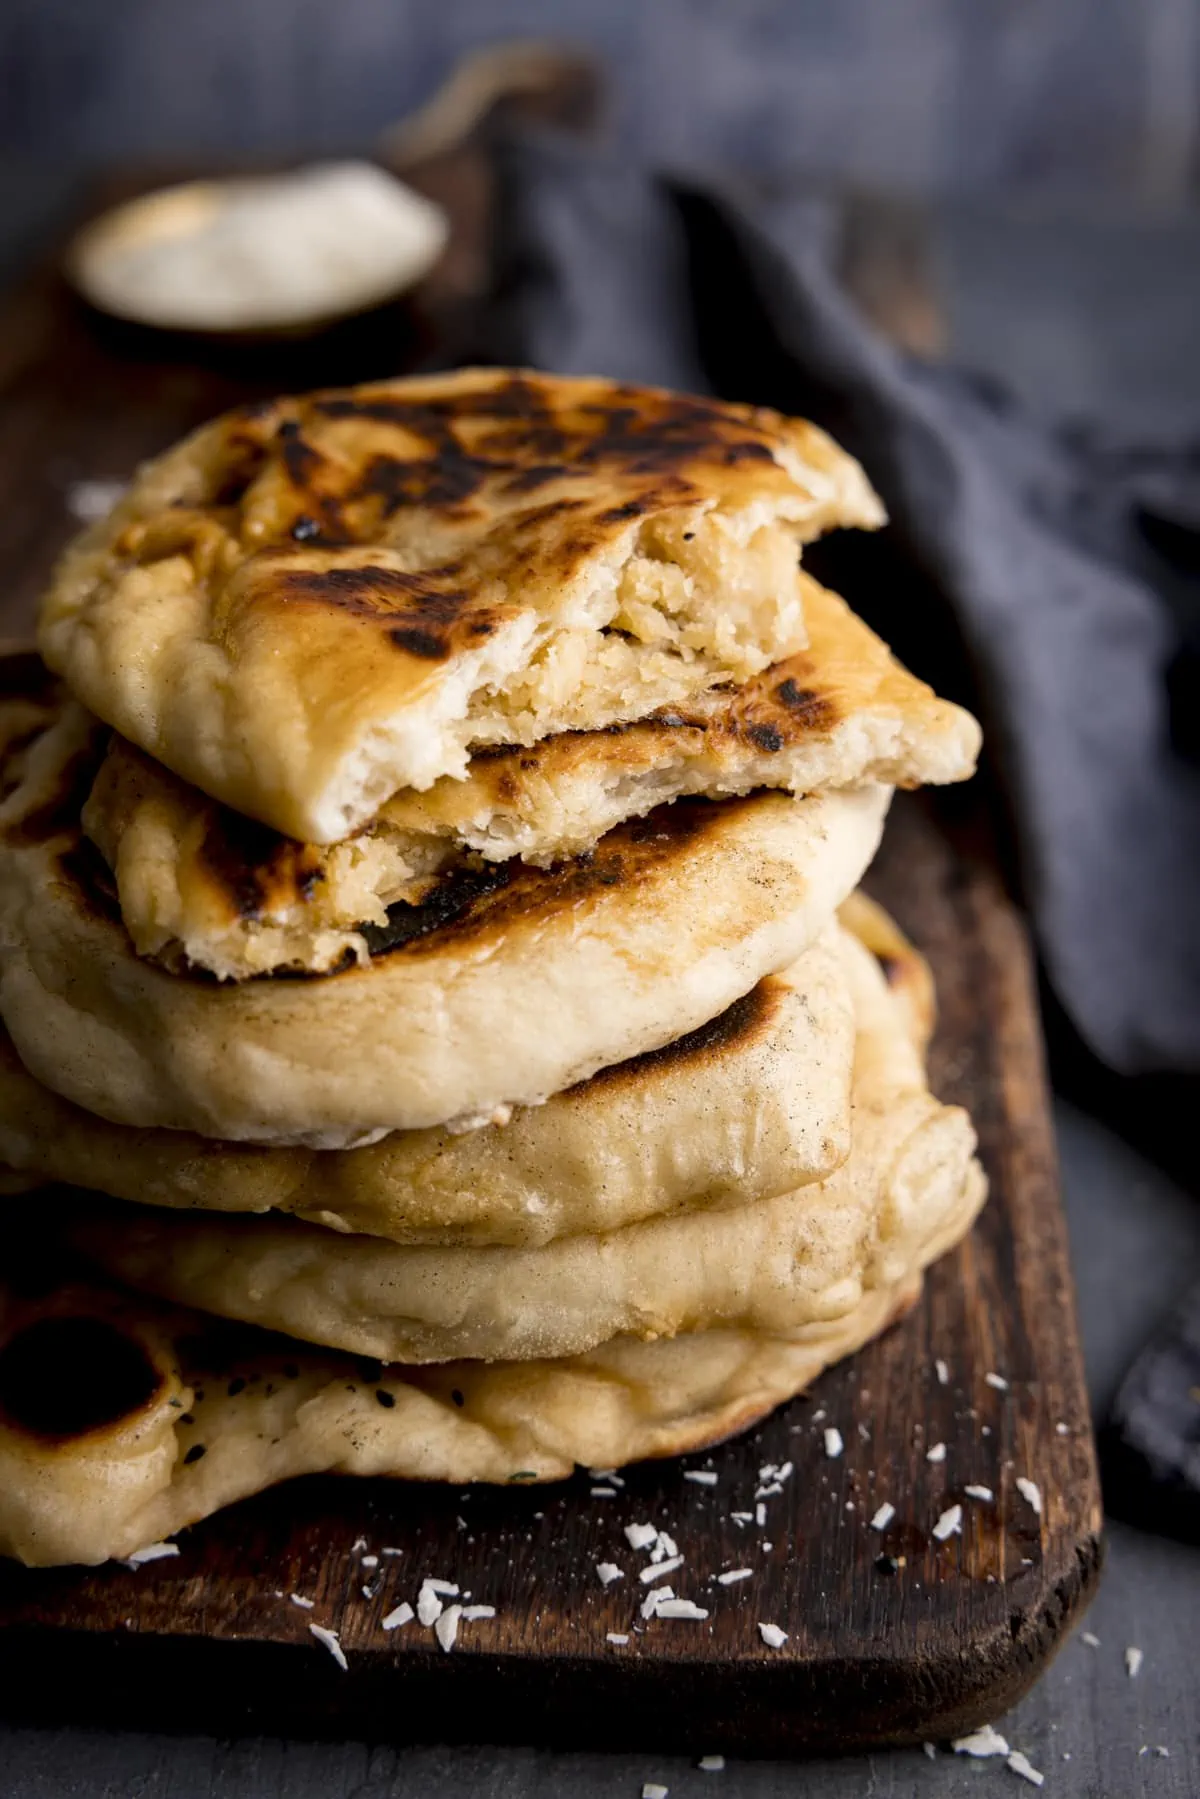 A stack of peshwari naan breads on a dark wooden board against a blue background. There is a blue napkin in shot. The top naan has been broken into two to show the filling.